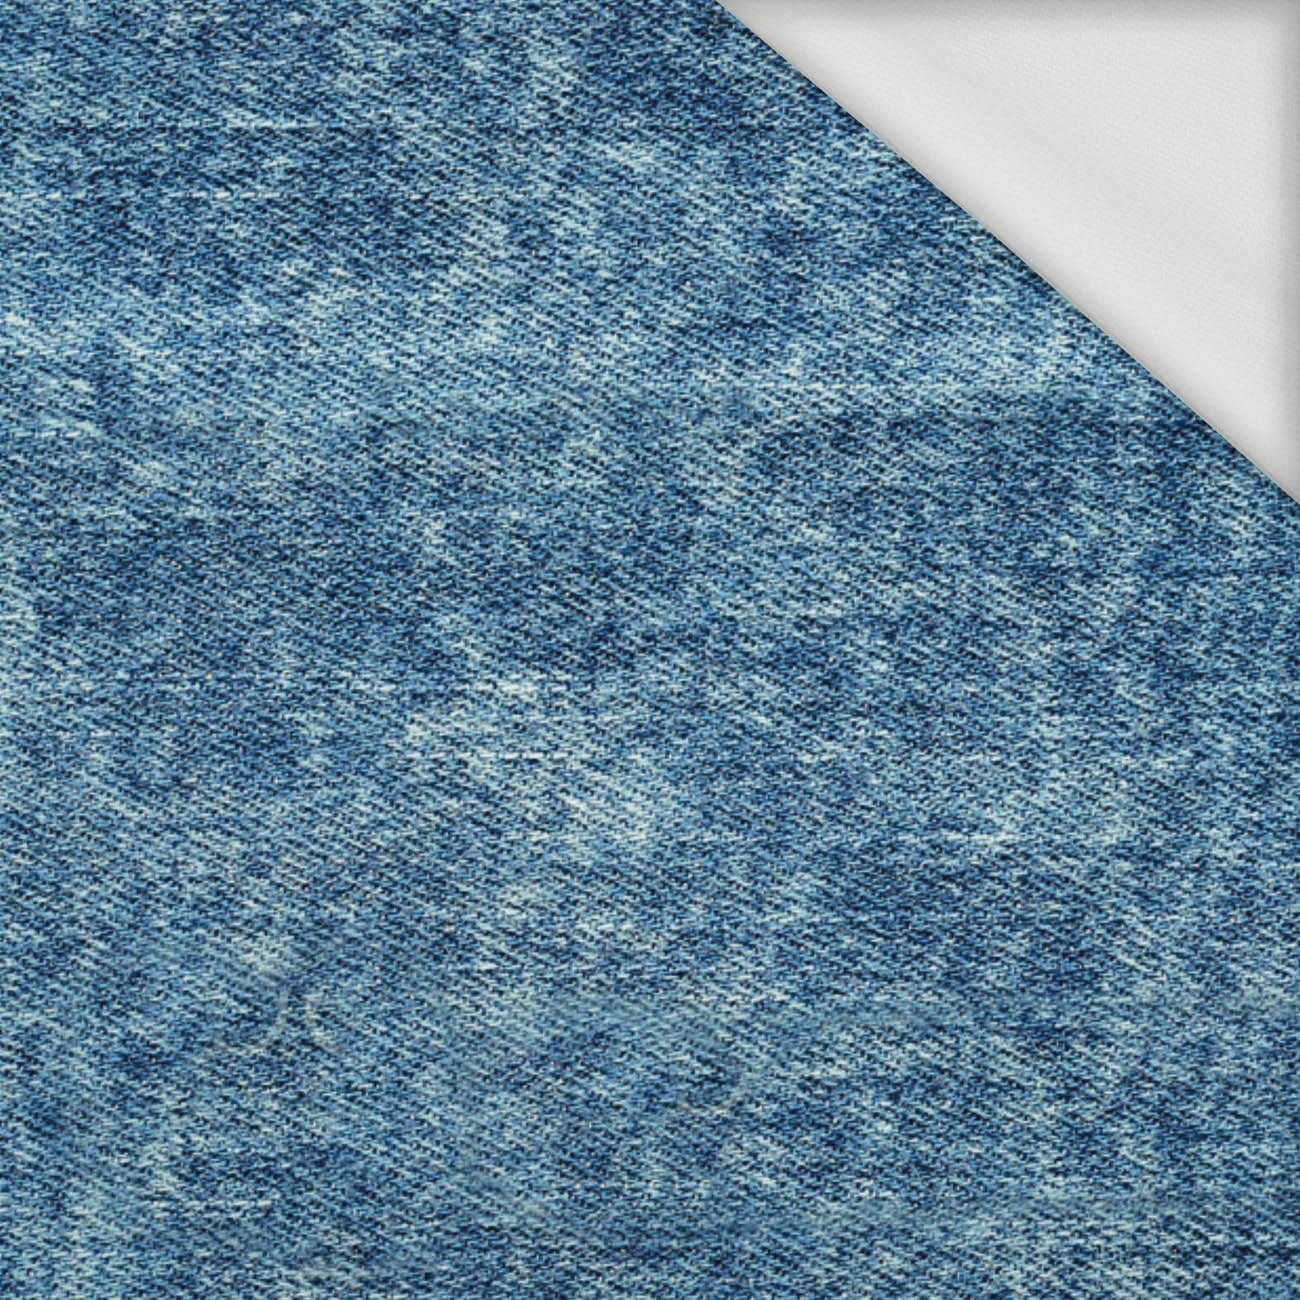 VINTAGE LOOK JEANS (Altantic Blue) - looped knit fabric